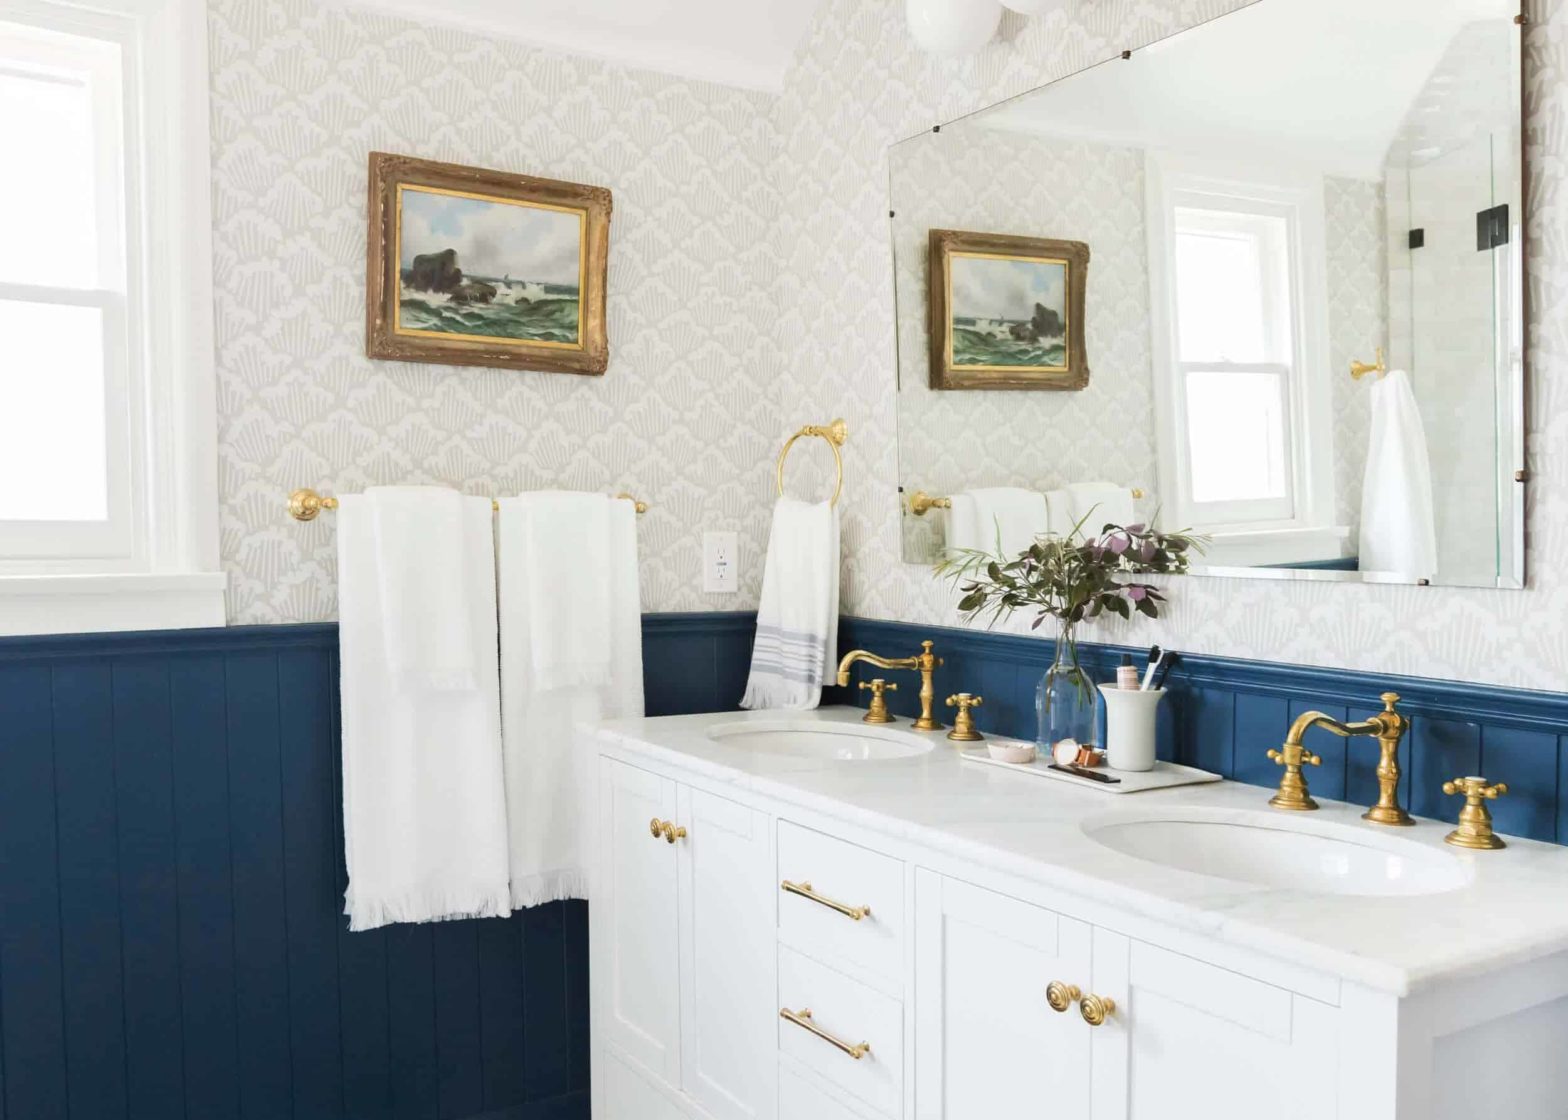 More Renovation Regrets And Cautionary Tales As Told By Our Readers: Bathroom Edition